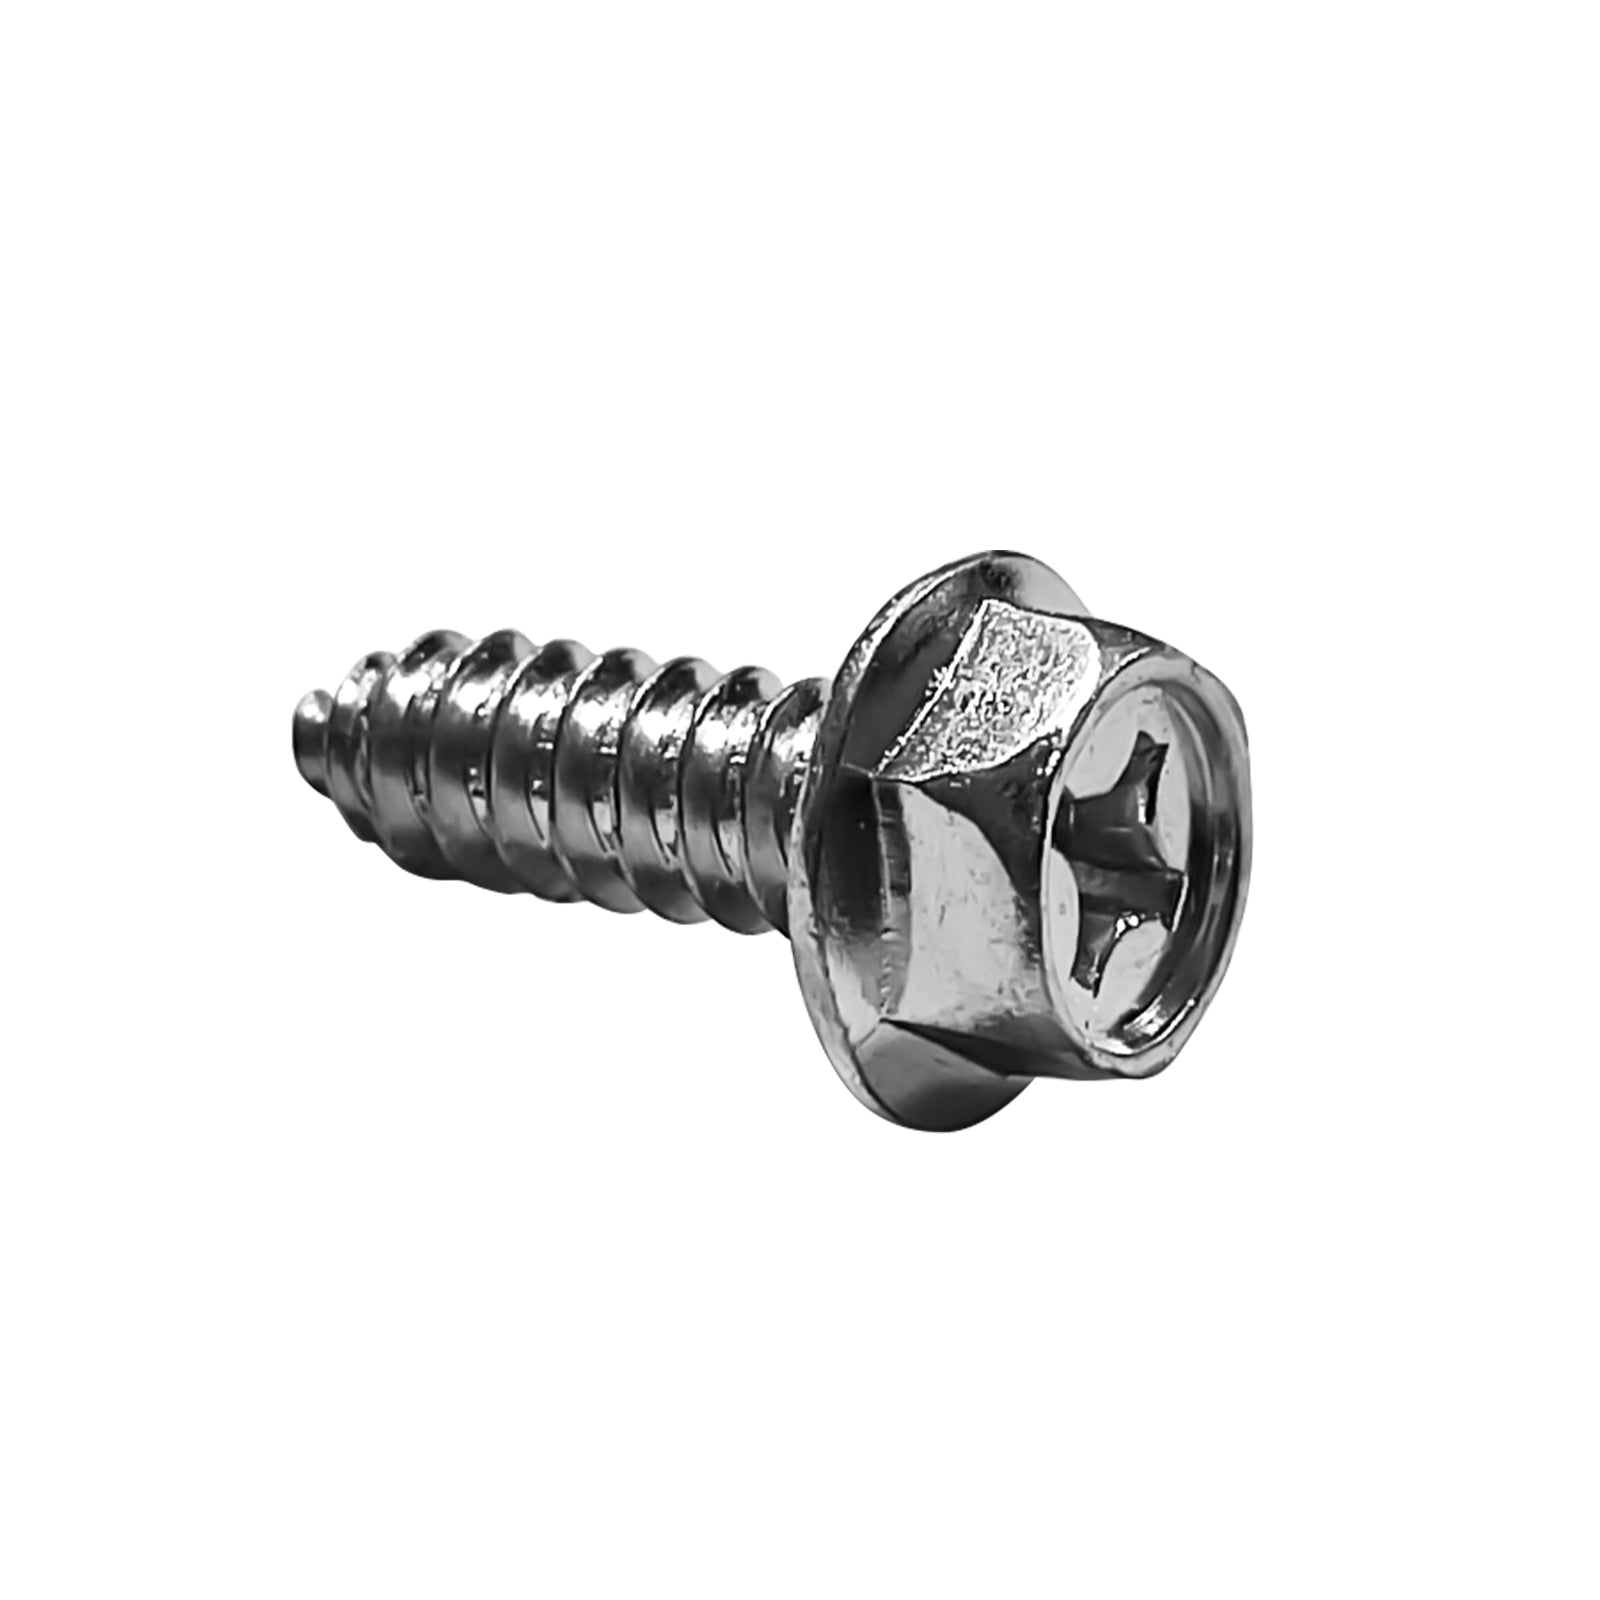 PowerSmart Lawn Mower Parts - Self-tapping screw, Stock #: 303010378